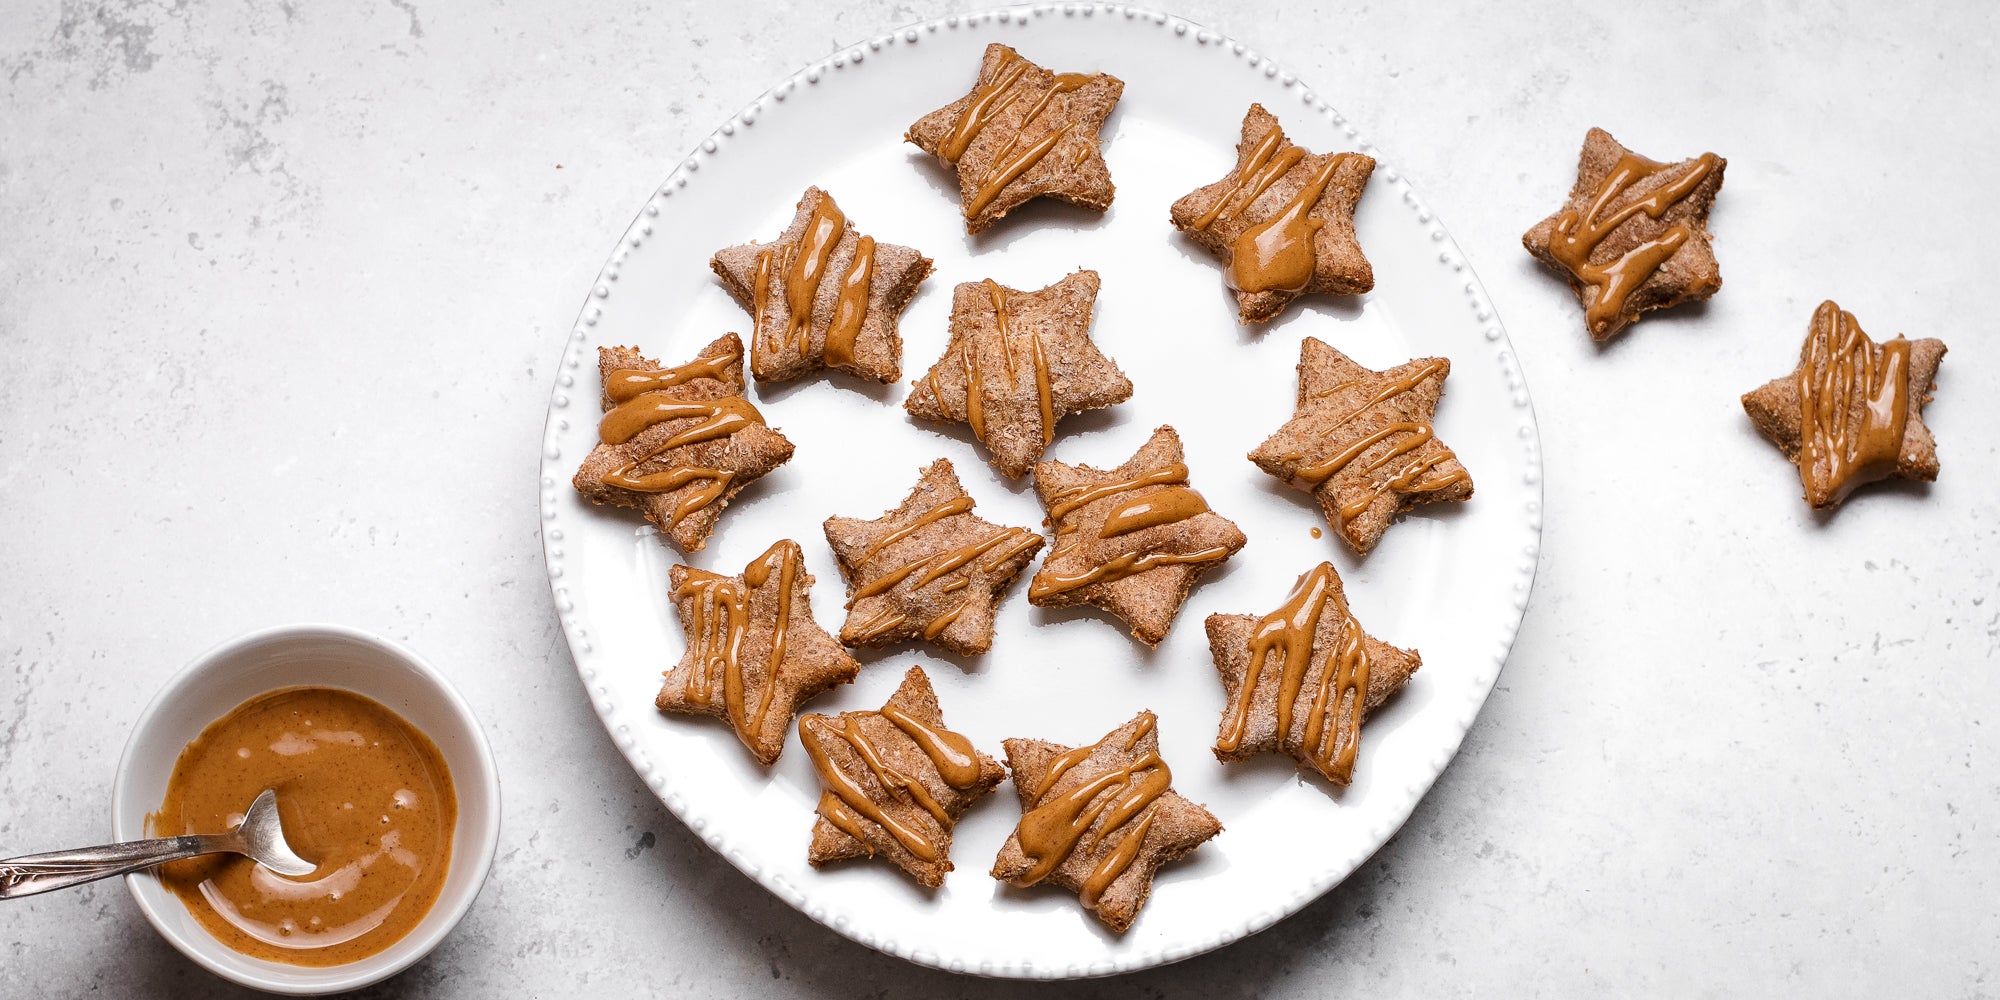 Star shaped festive Dog Biscuits drizzled with Proper Nutty peanut butter on a plate